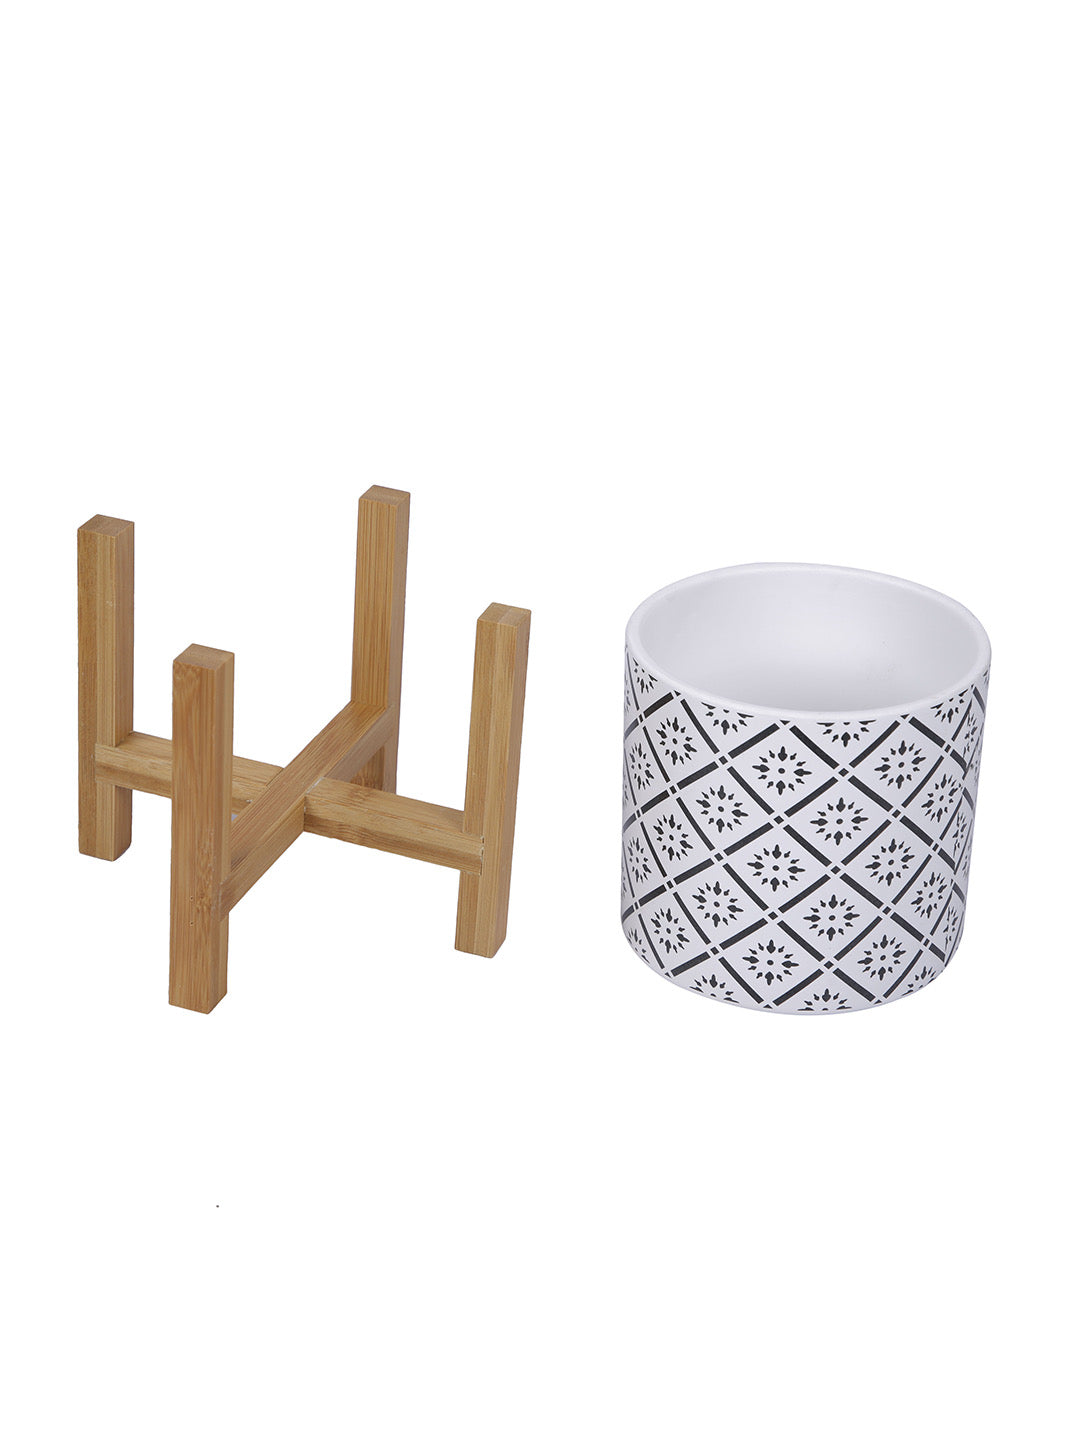 Ceramic Matte Planter with Wooden stand - Default Title (CHC22389B)